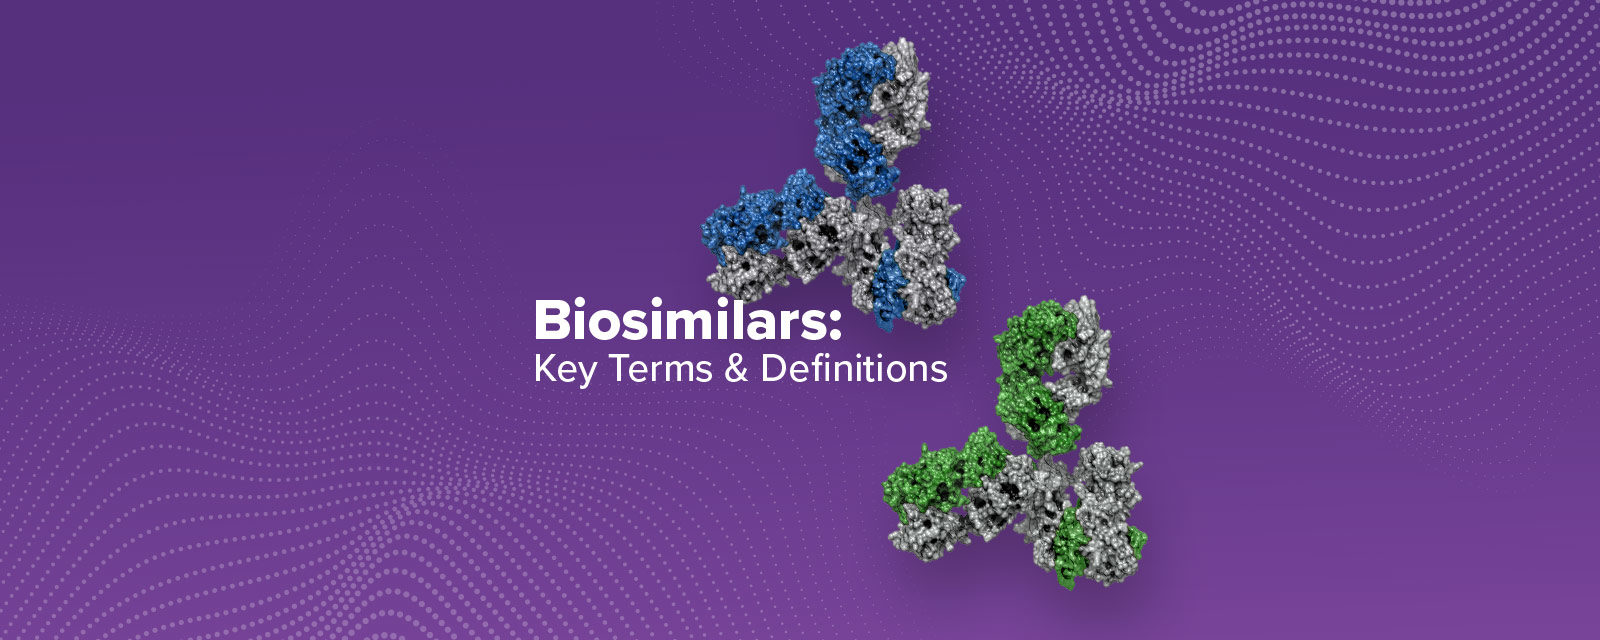 Biosimilars: Key Terms and Definitions